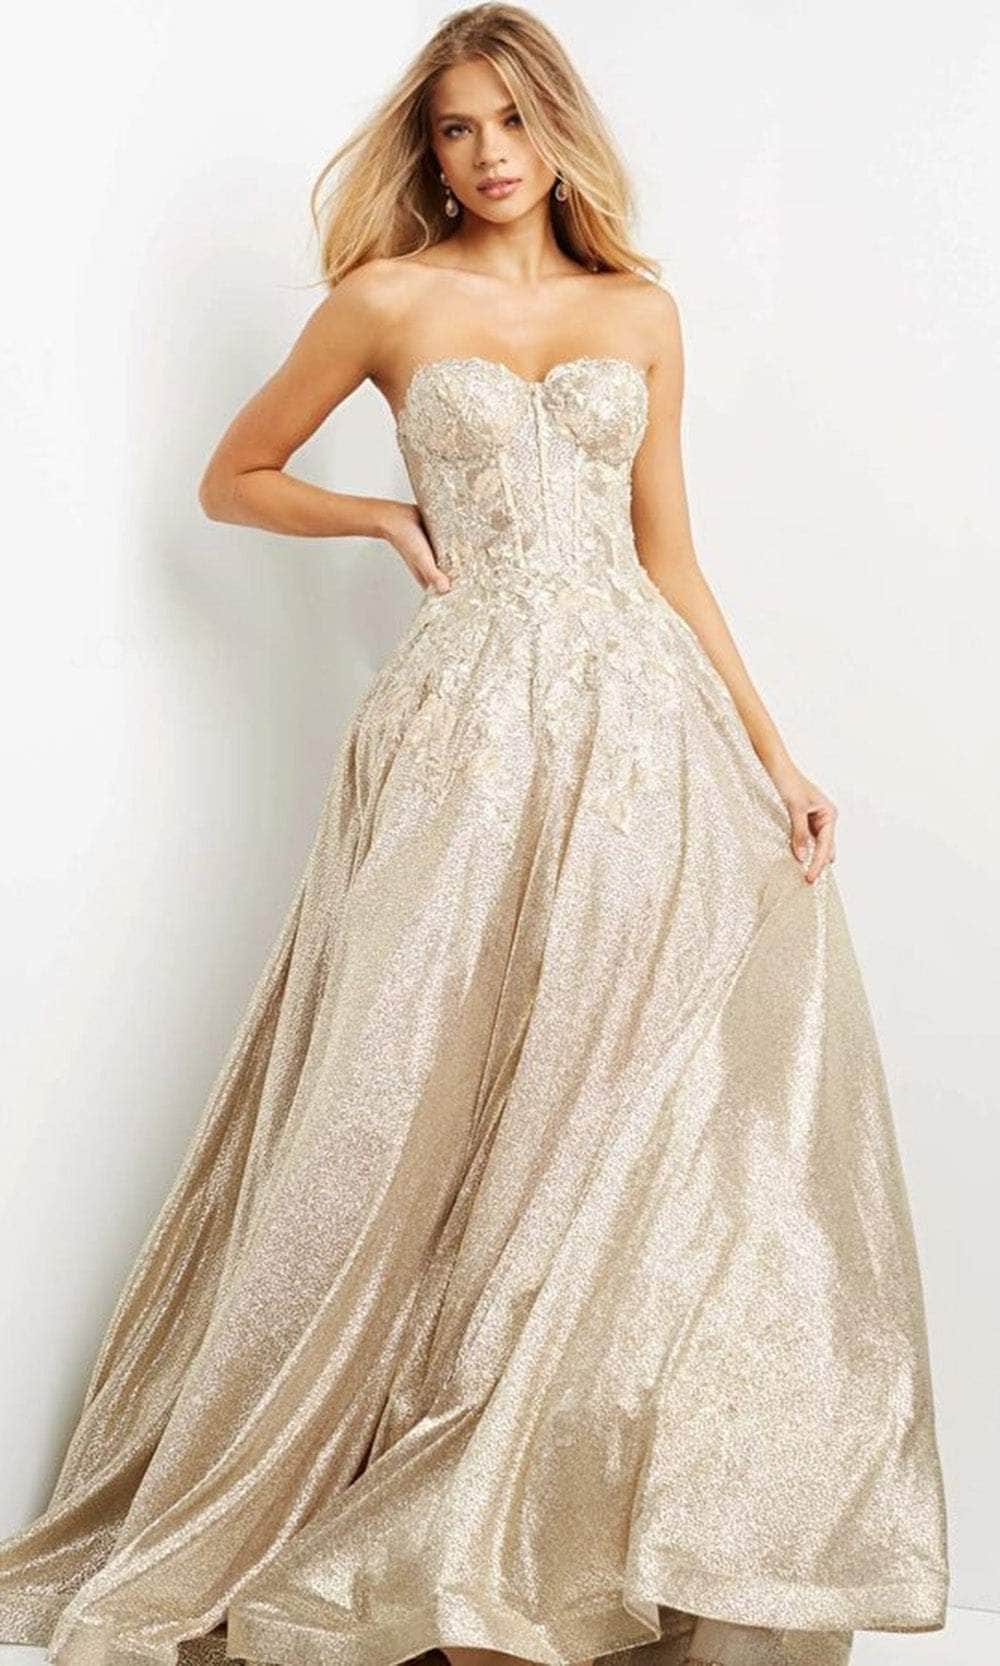 Image of Jovani 07497 - Strapless Sweetheart Neck Evening Gown